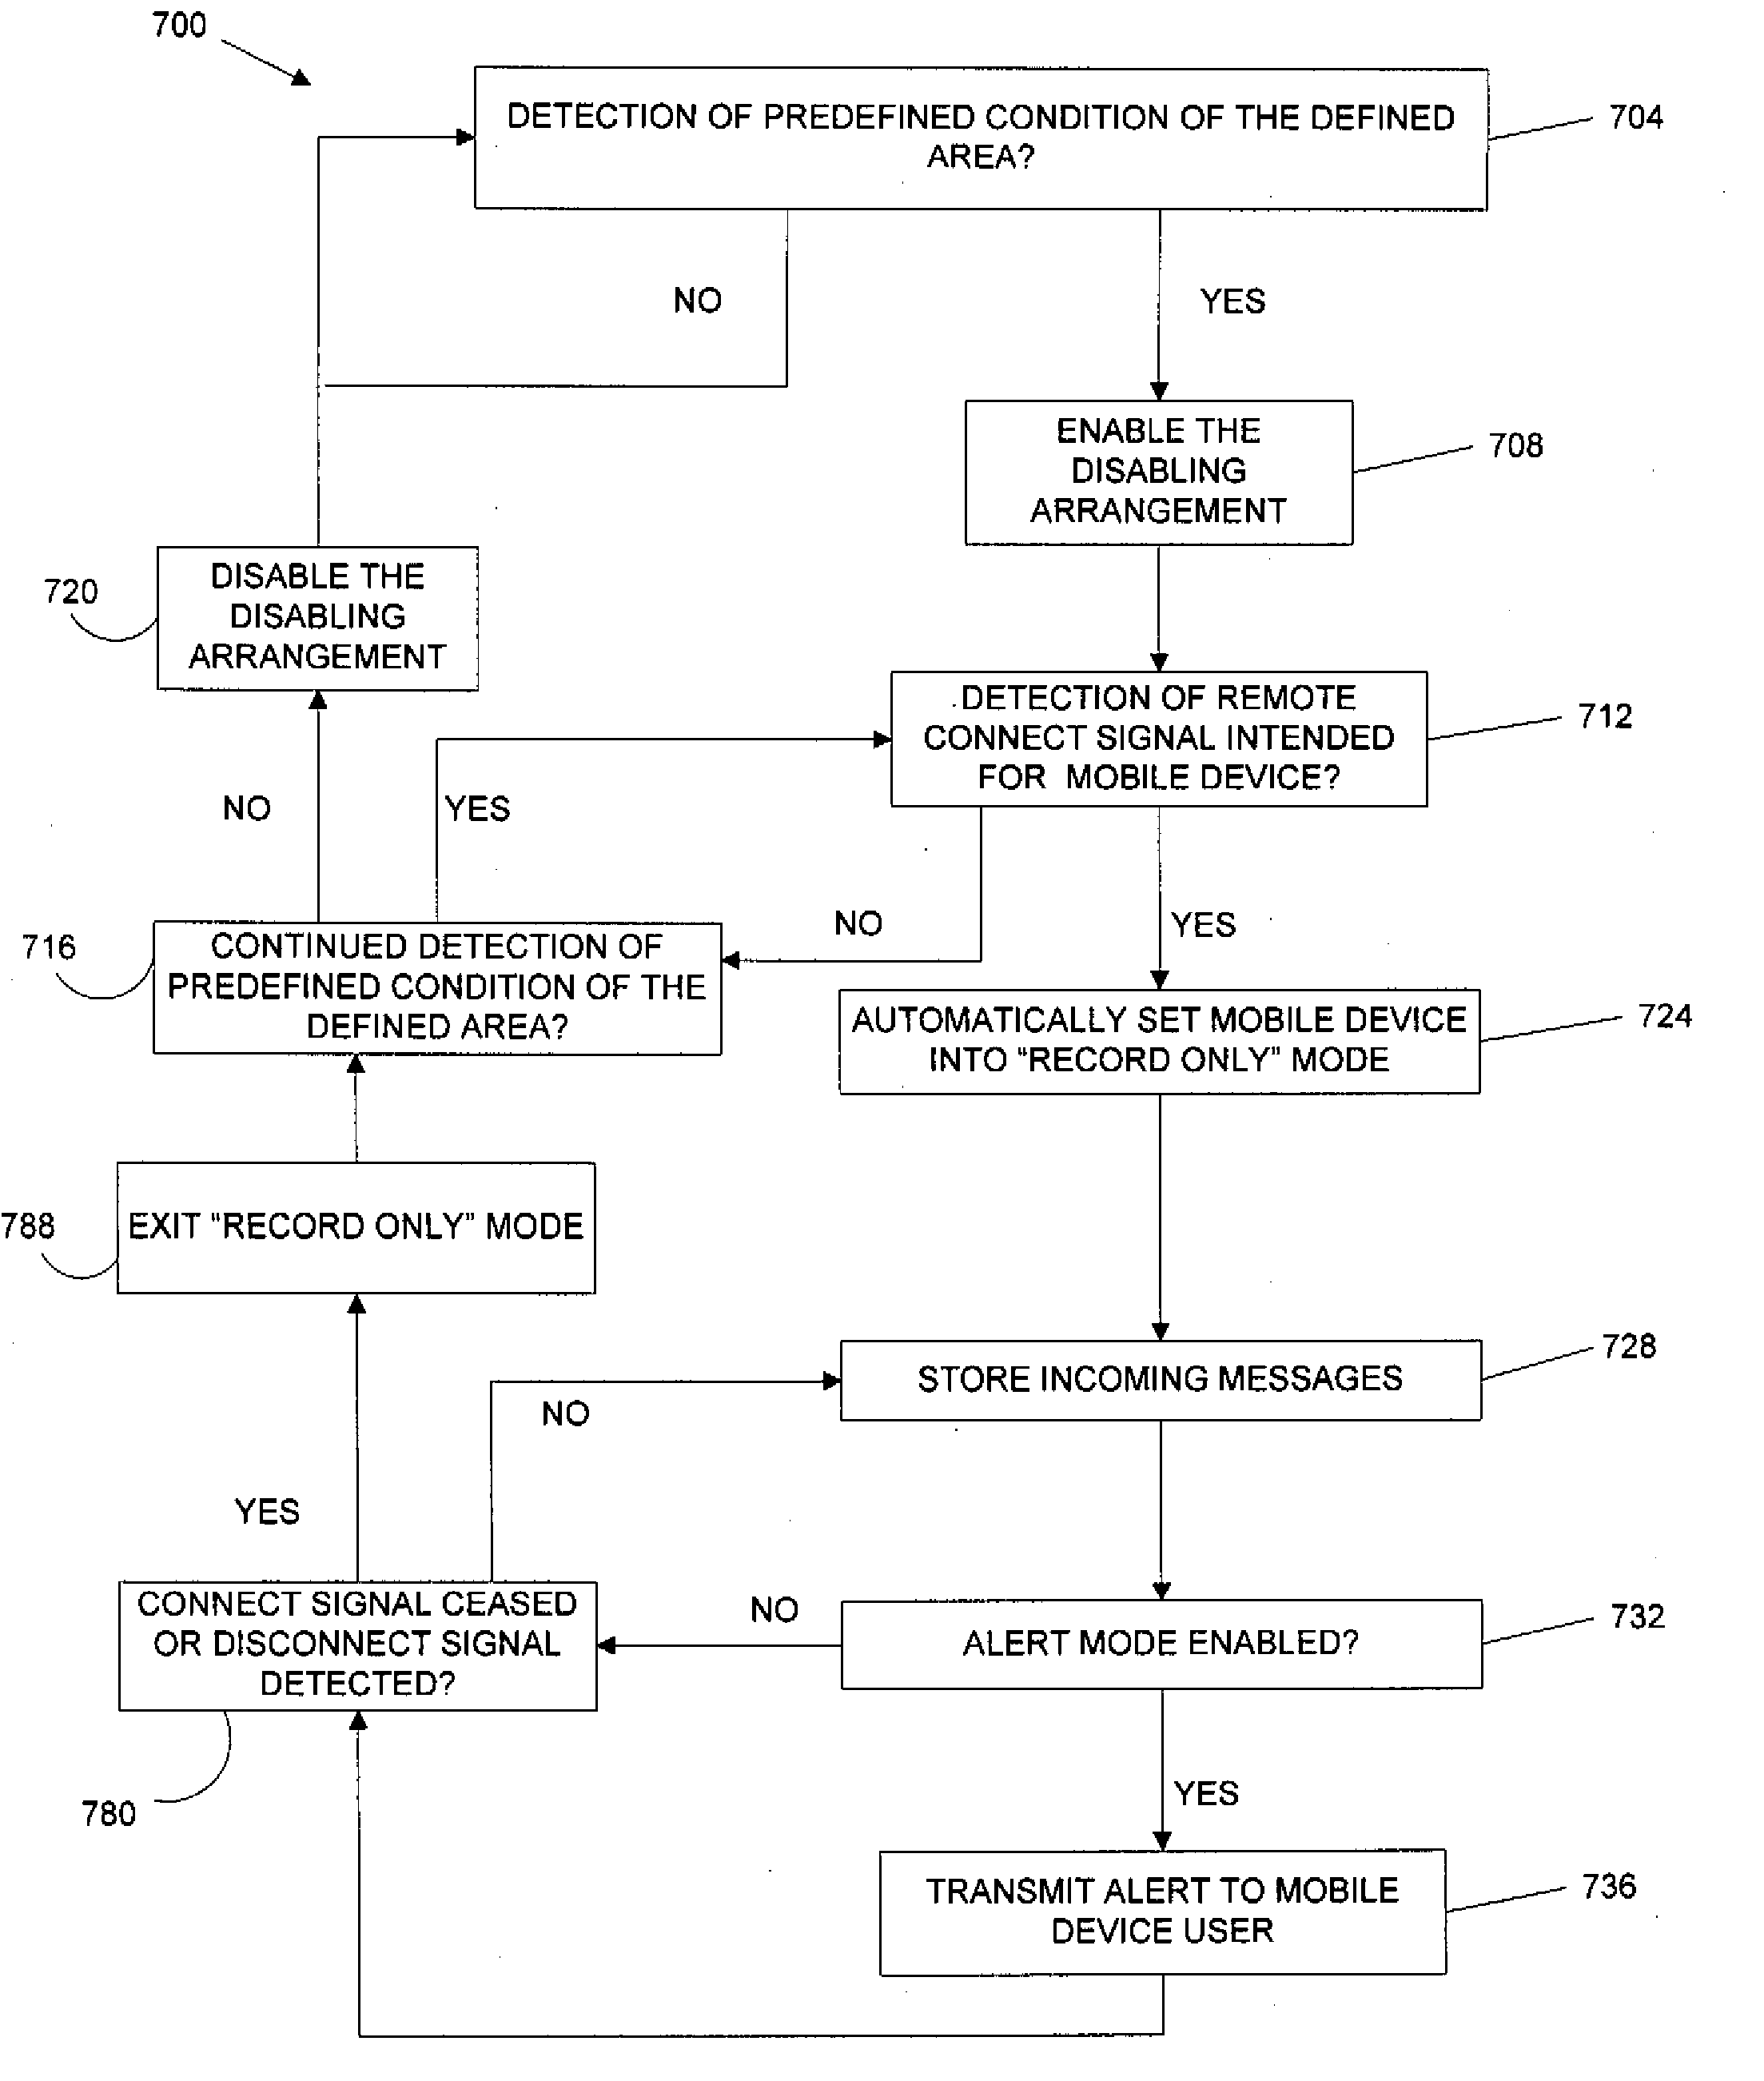 System for limiting mobile device functionality in designated environments